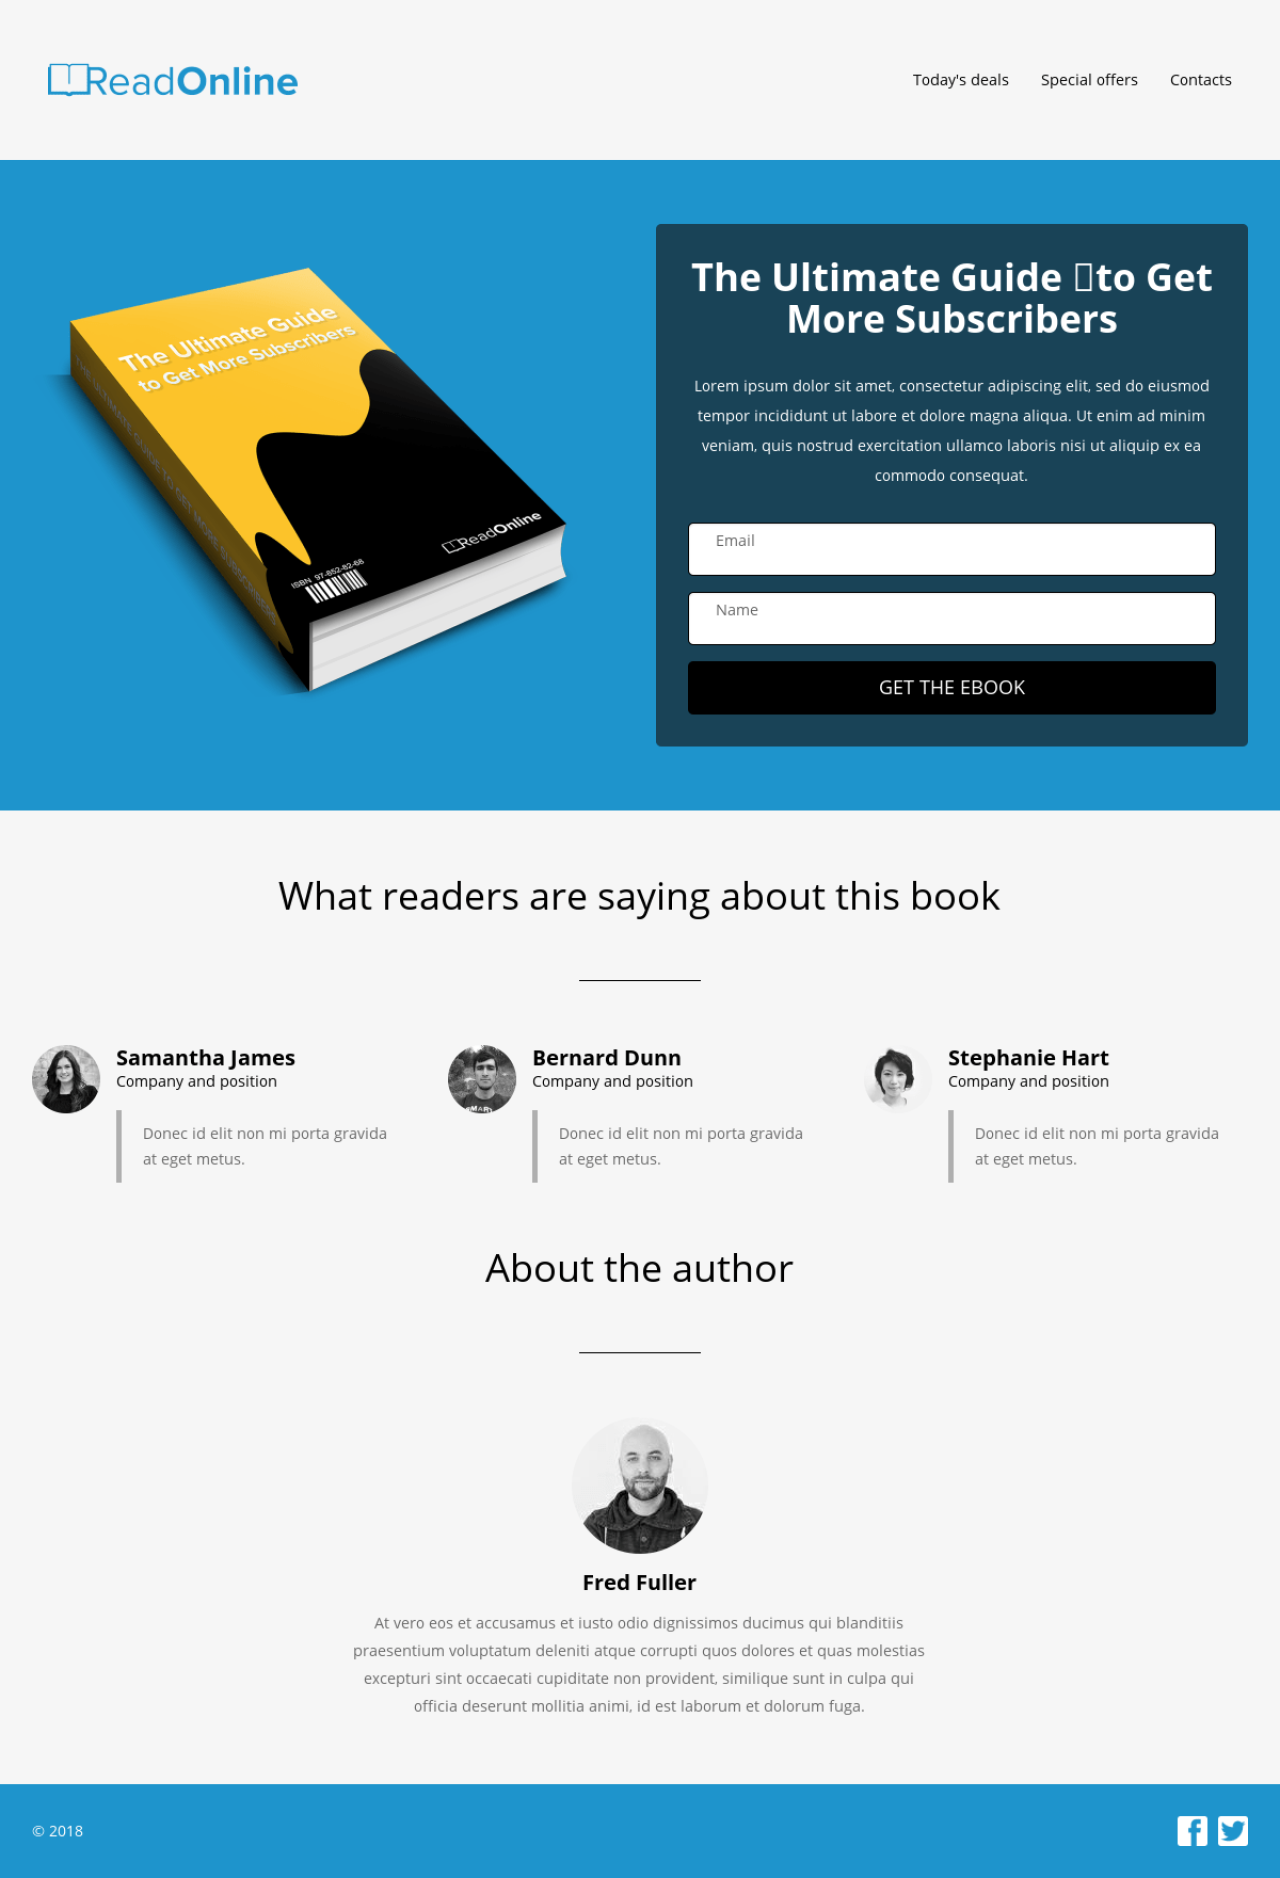 eBook Read Online example - Made with MailerLite